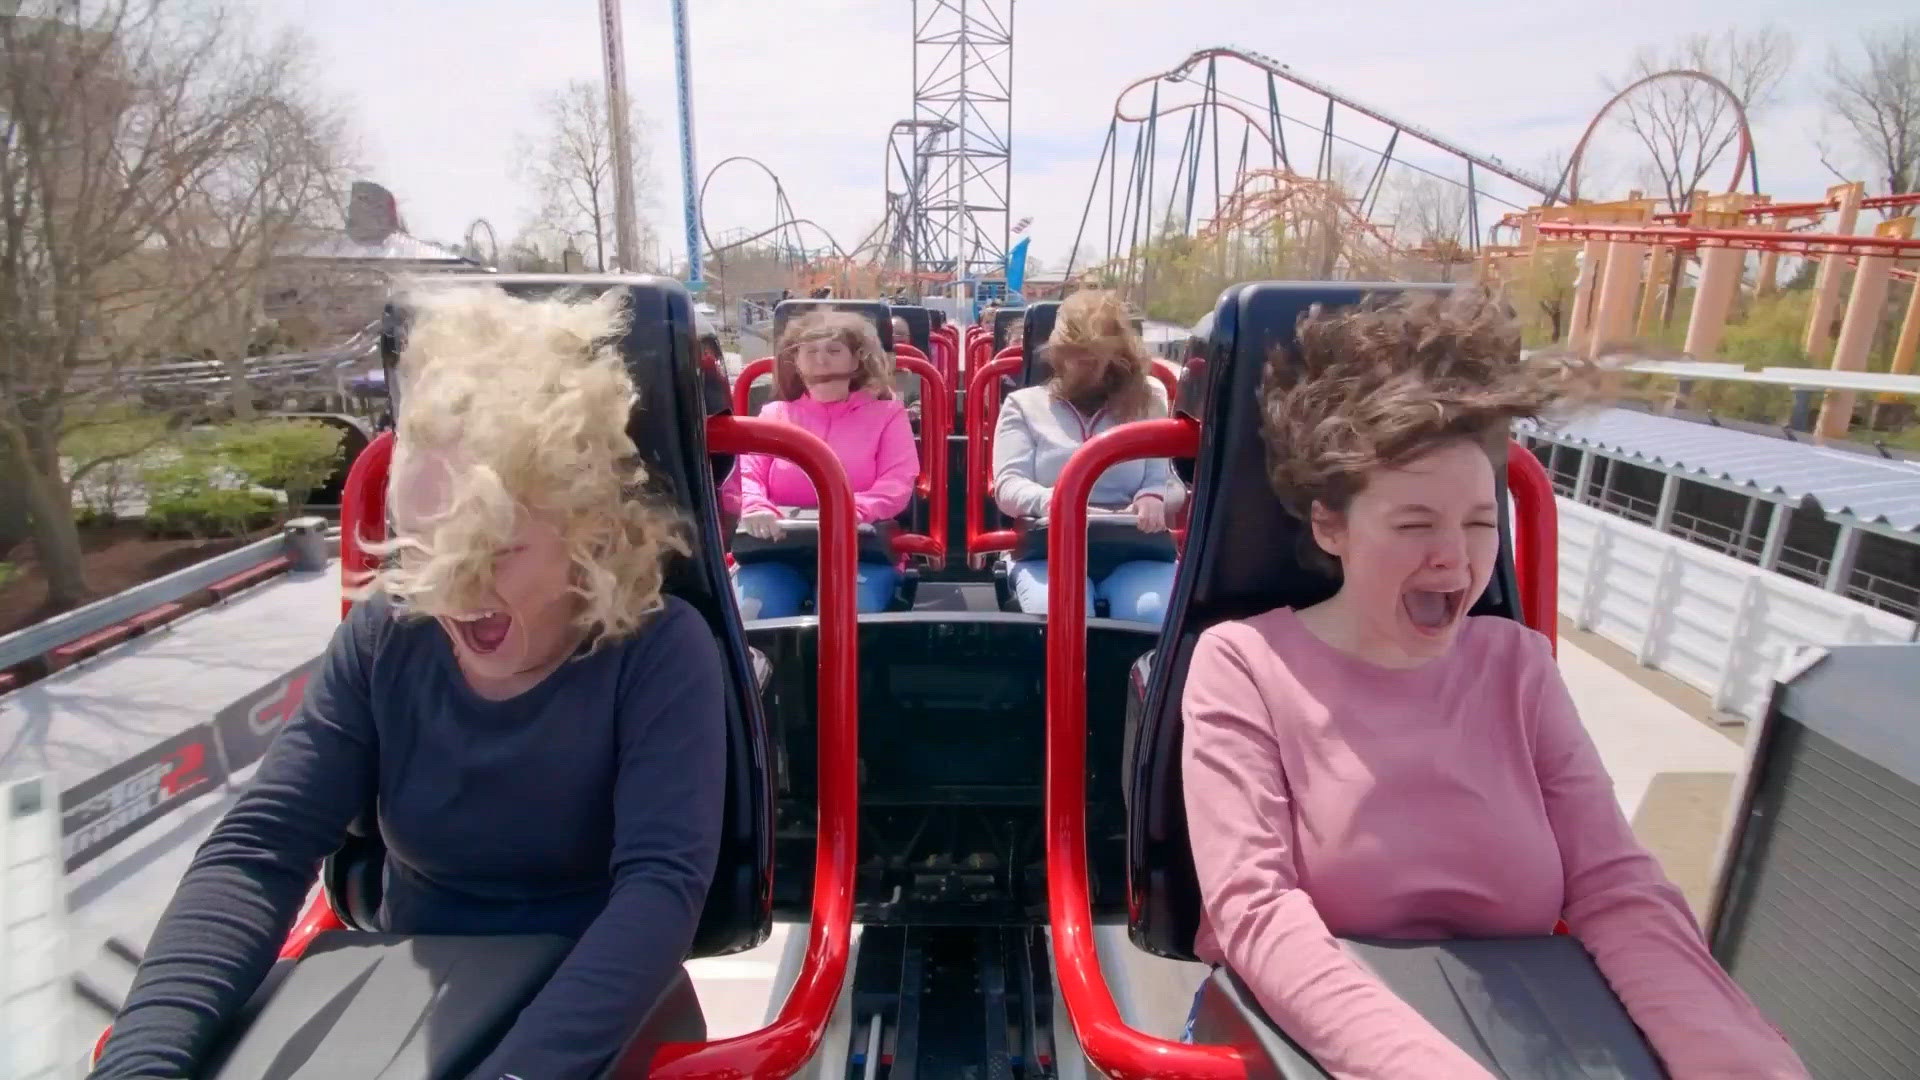 Are you ready to ride Top Thrill 2 at Cedar Point this year? Here's what it's like...